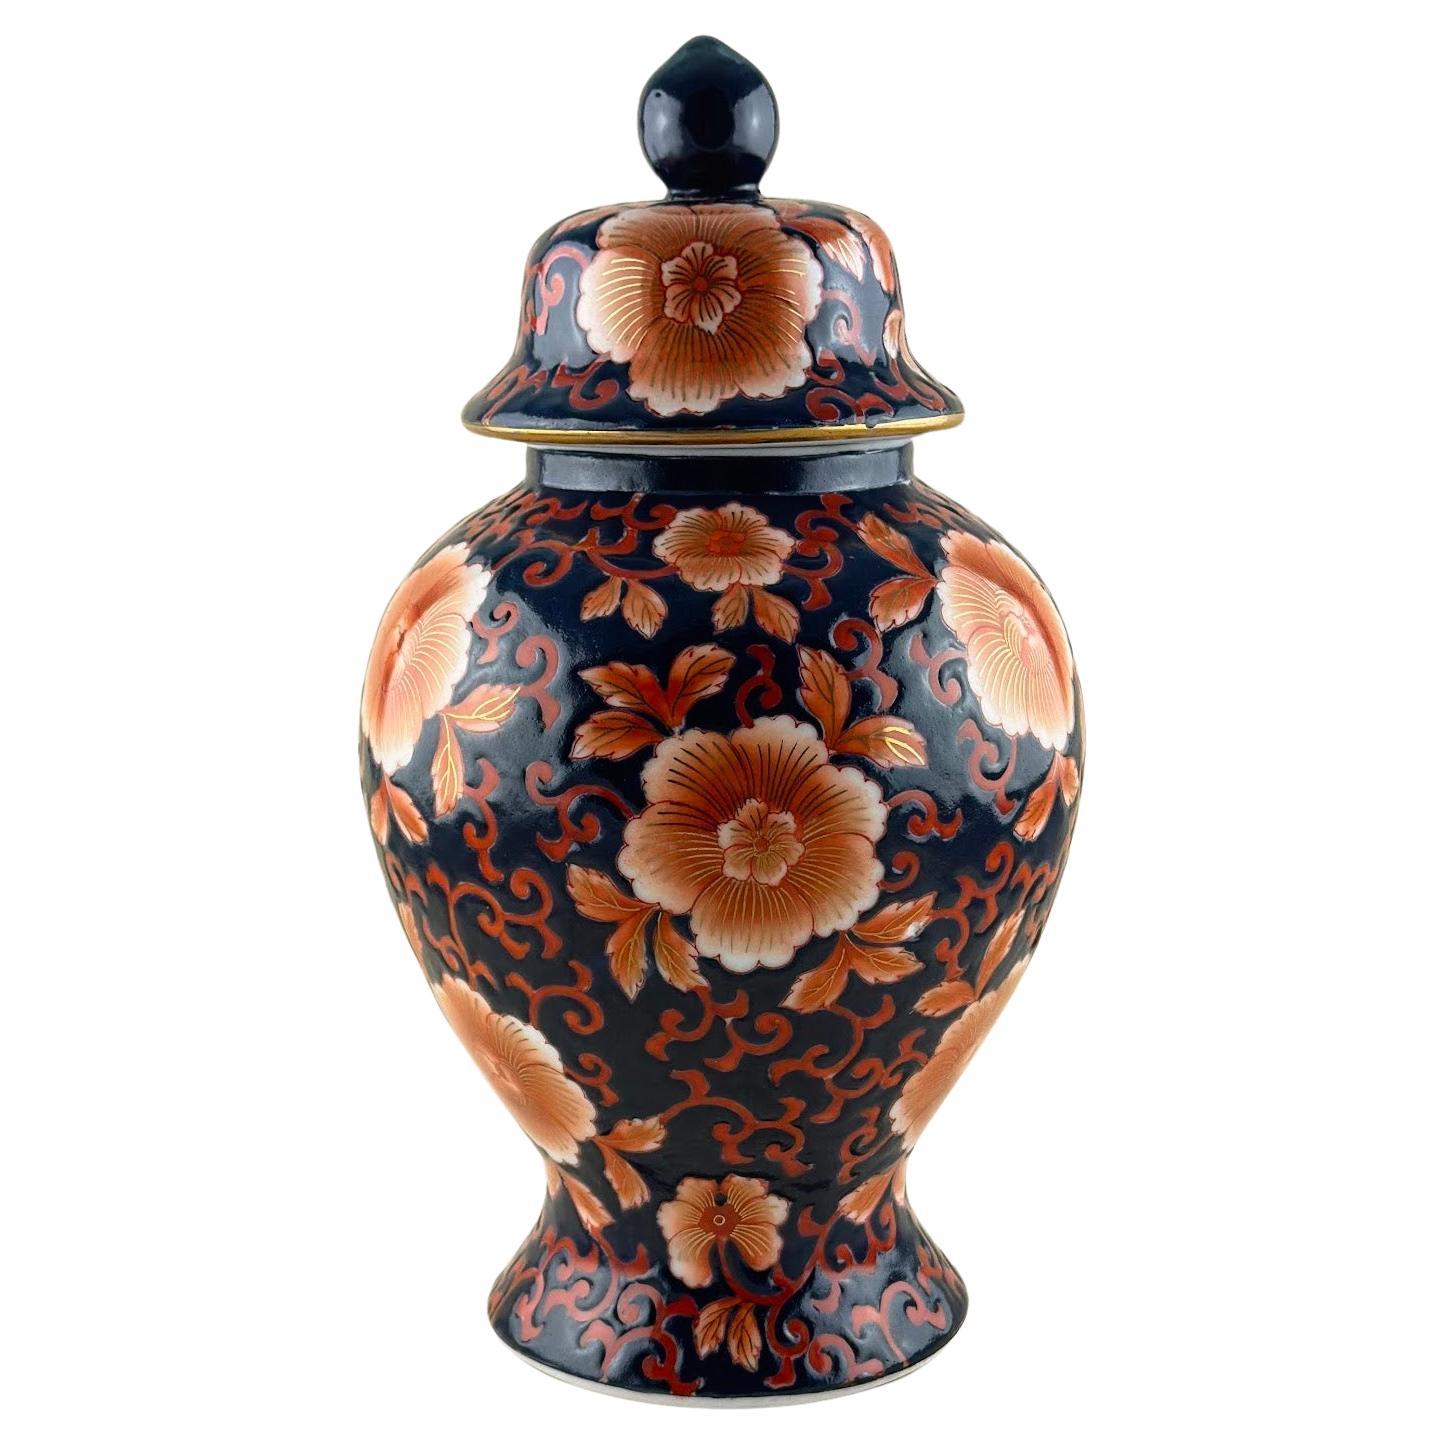 Who bought the Qianlong vase?